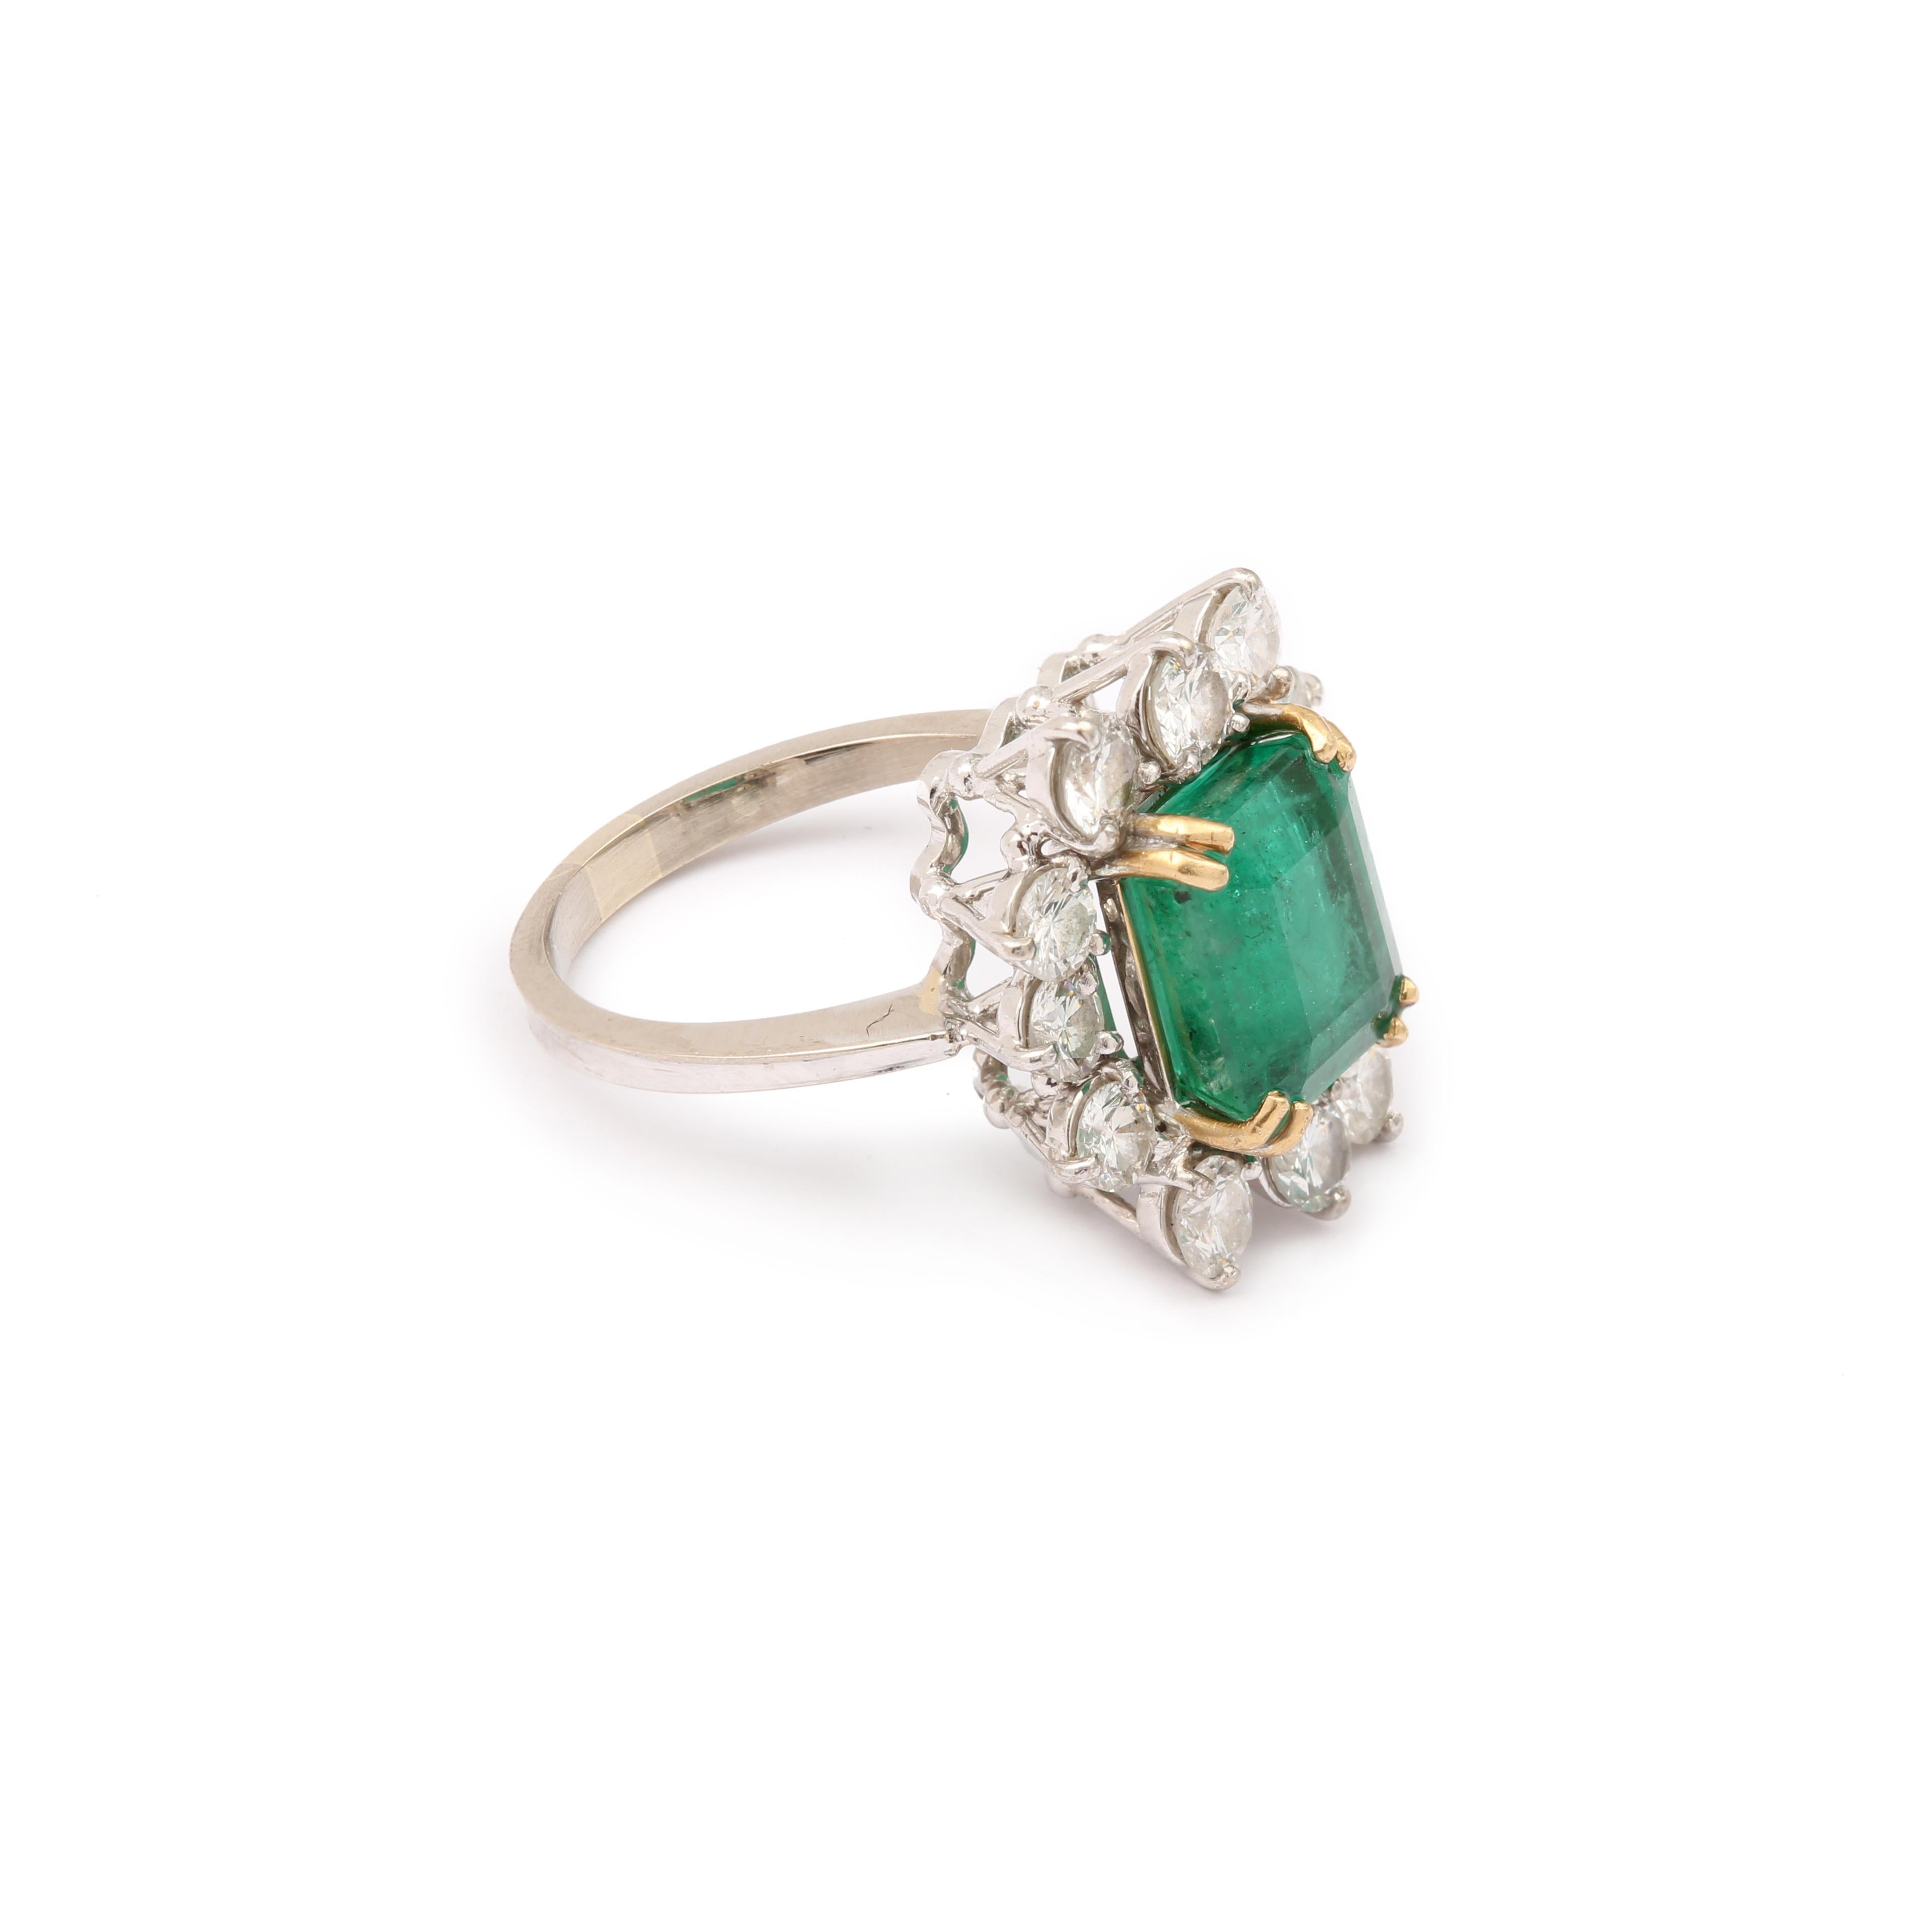 Beautiful pompadour style ring set with a Brazilian emerald of 4.21 carats in a setting of 12 brilliant diamonds.

Weight of the emerald : 4.21 carats

With Carat Gem Lab certificate, specifying natural emerald, minor oil impregnation, origin